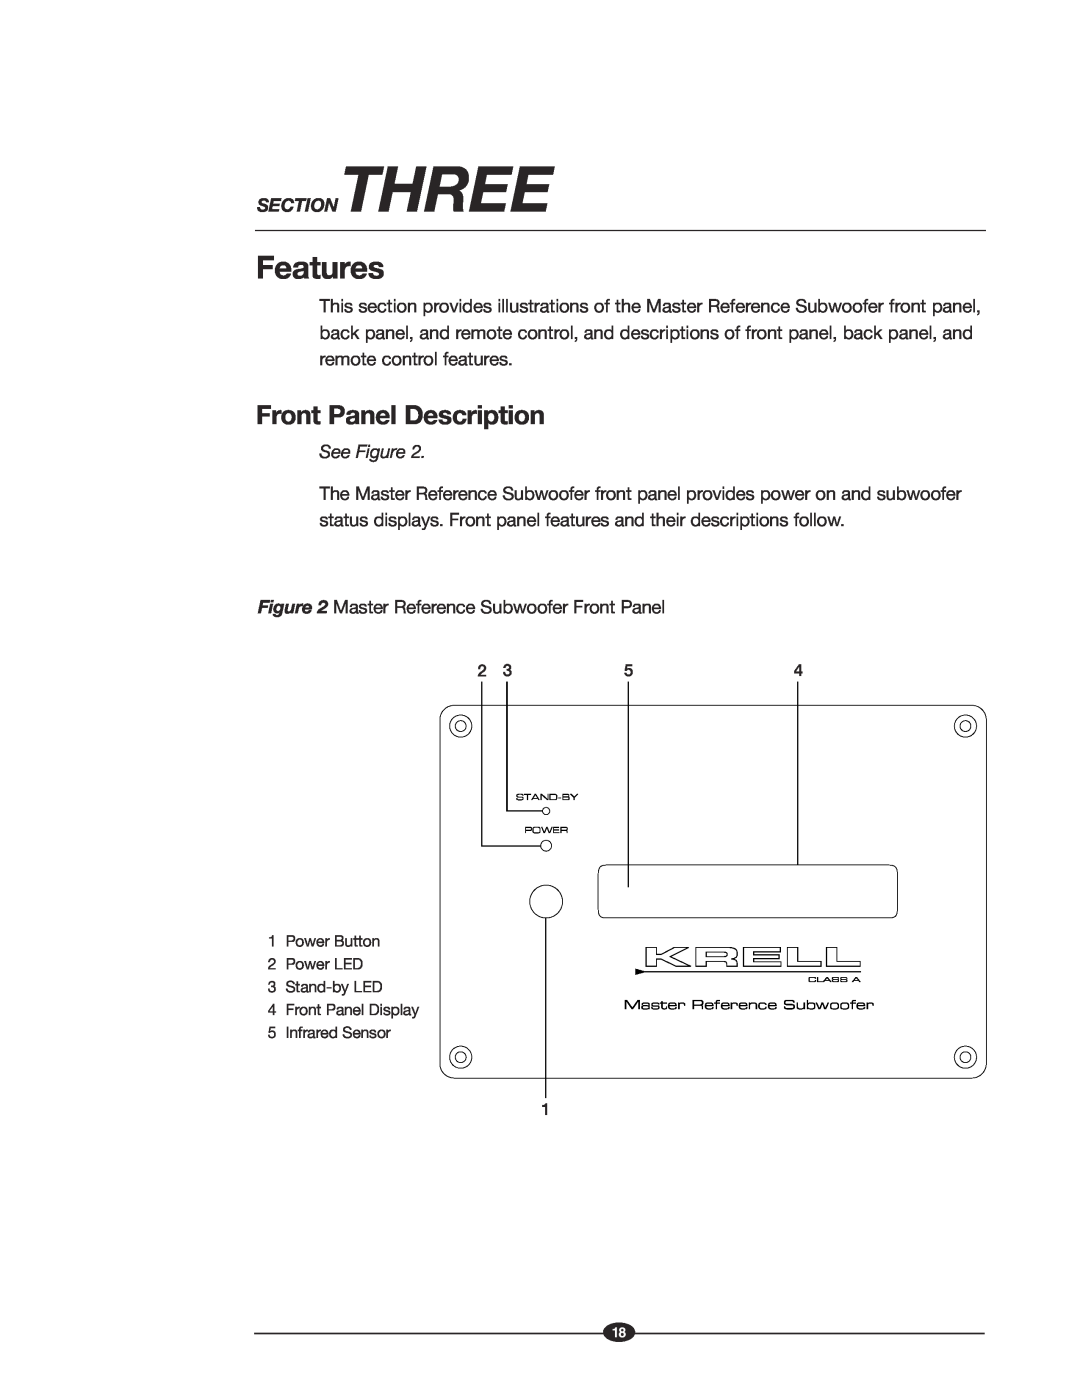 Krell Industries MASTER REFERENCE SUBWOOFER manual Features, Front Panel Description, Section Three, See Figure 